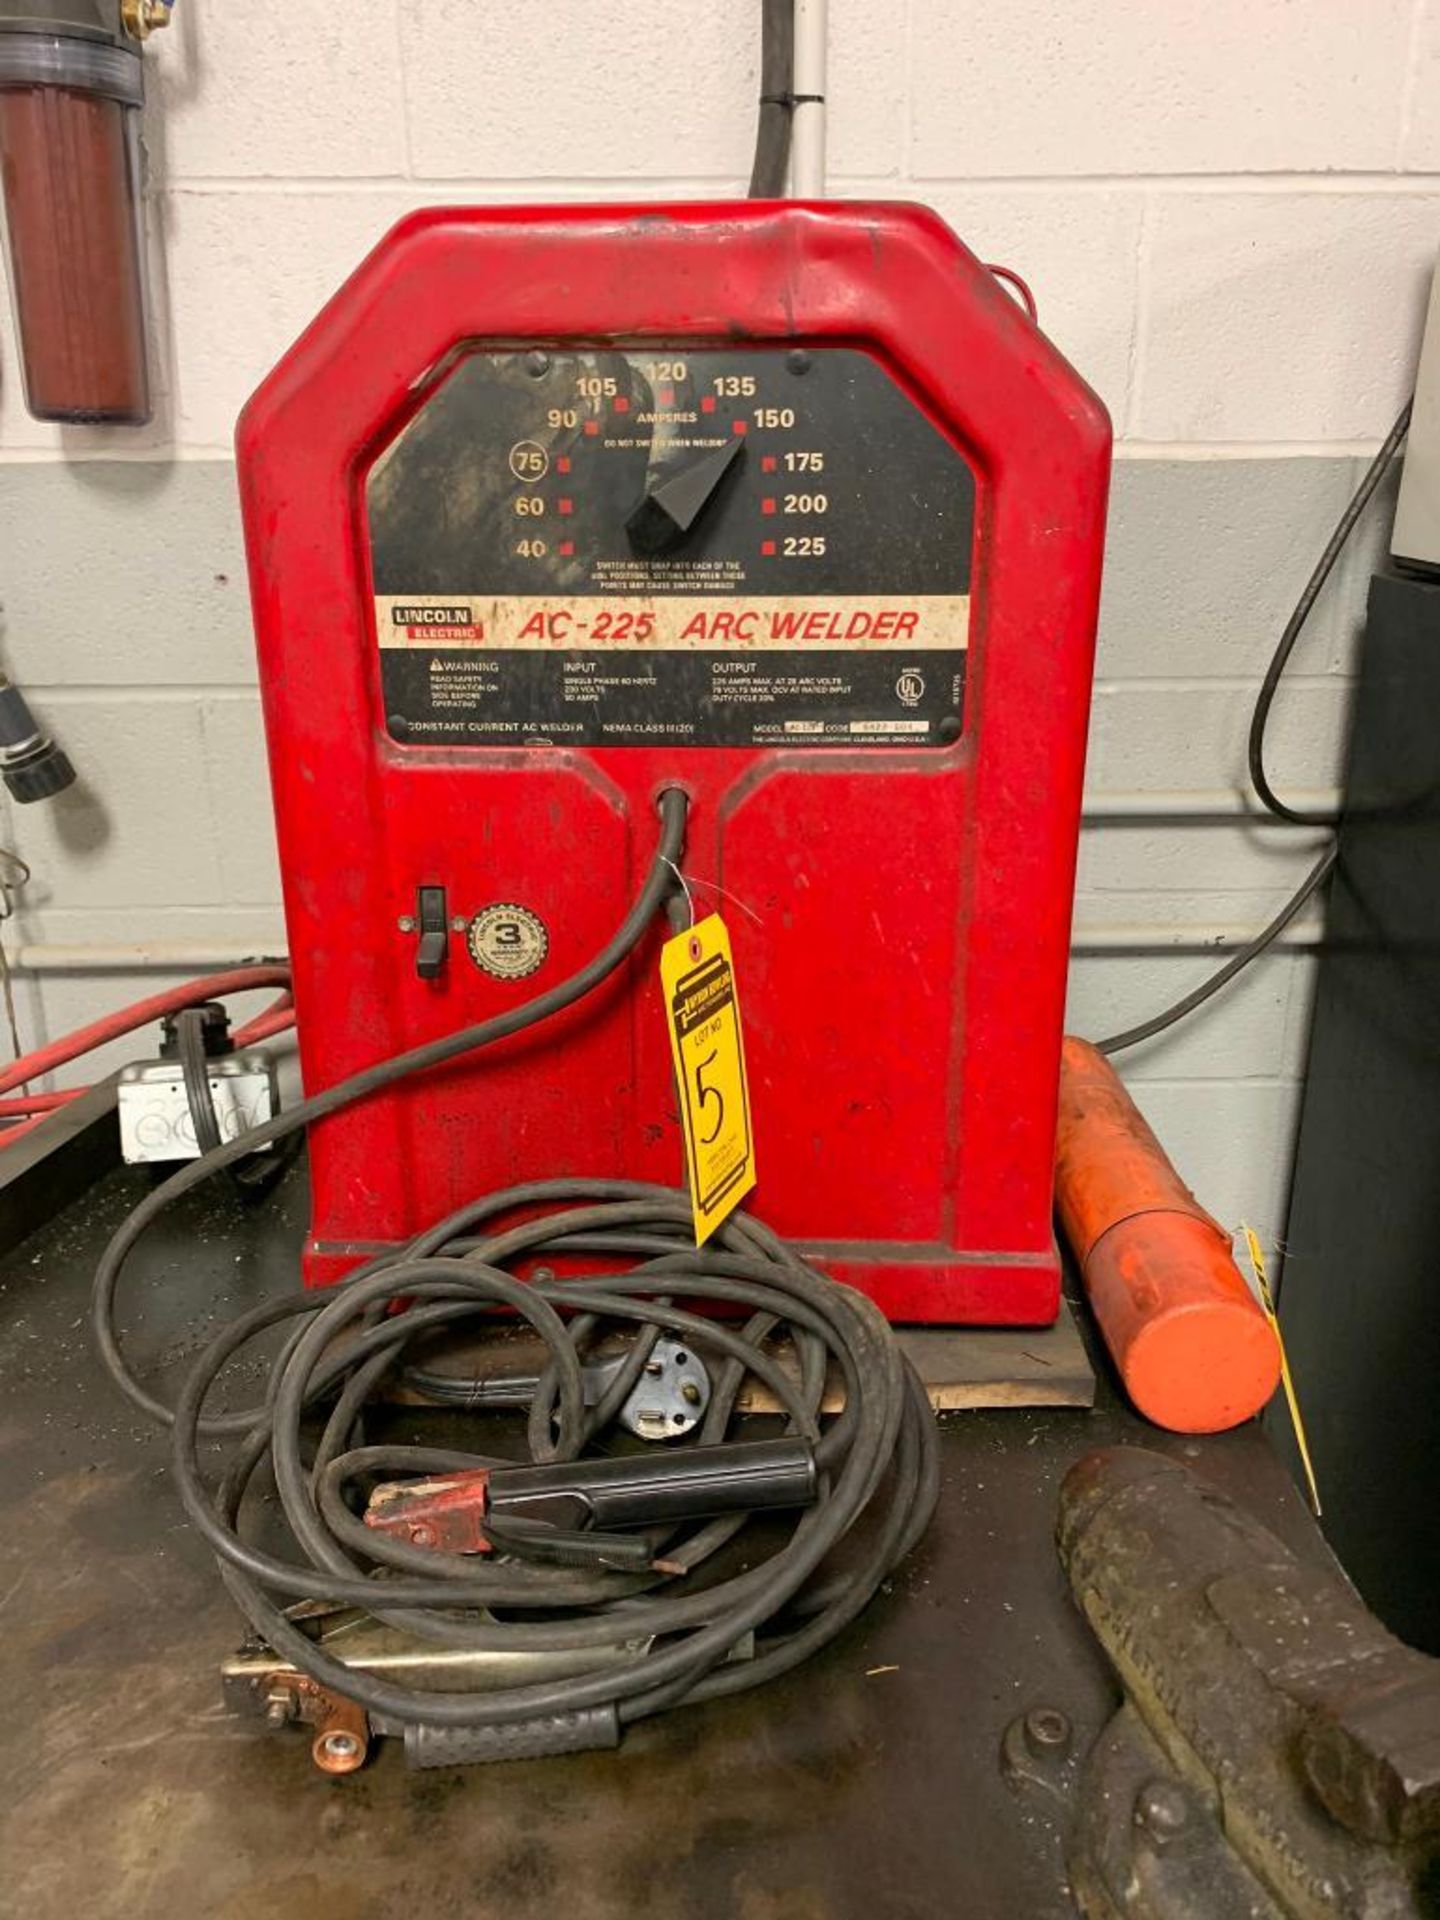 LINCOLN ELECTRIC AC-225 ARC WELDER, S/N 9422-604, OUTPUT 225 AMP, GROUND LEAD, ELECTRODE HOLDER